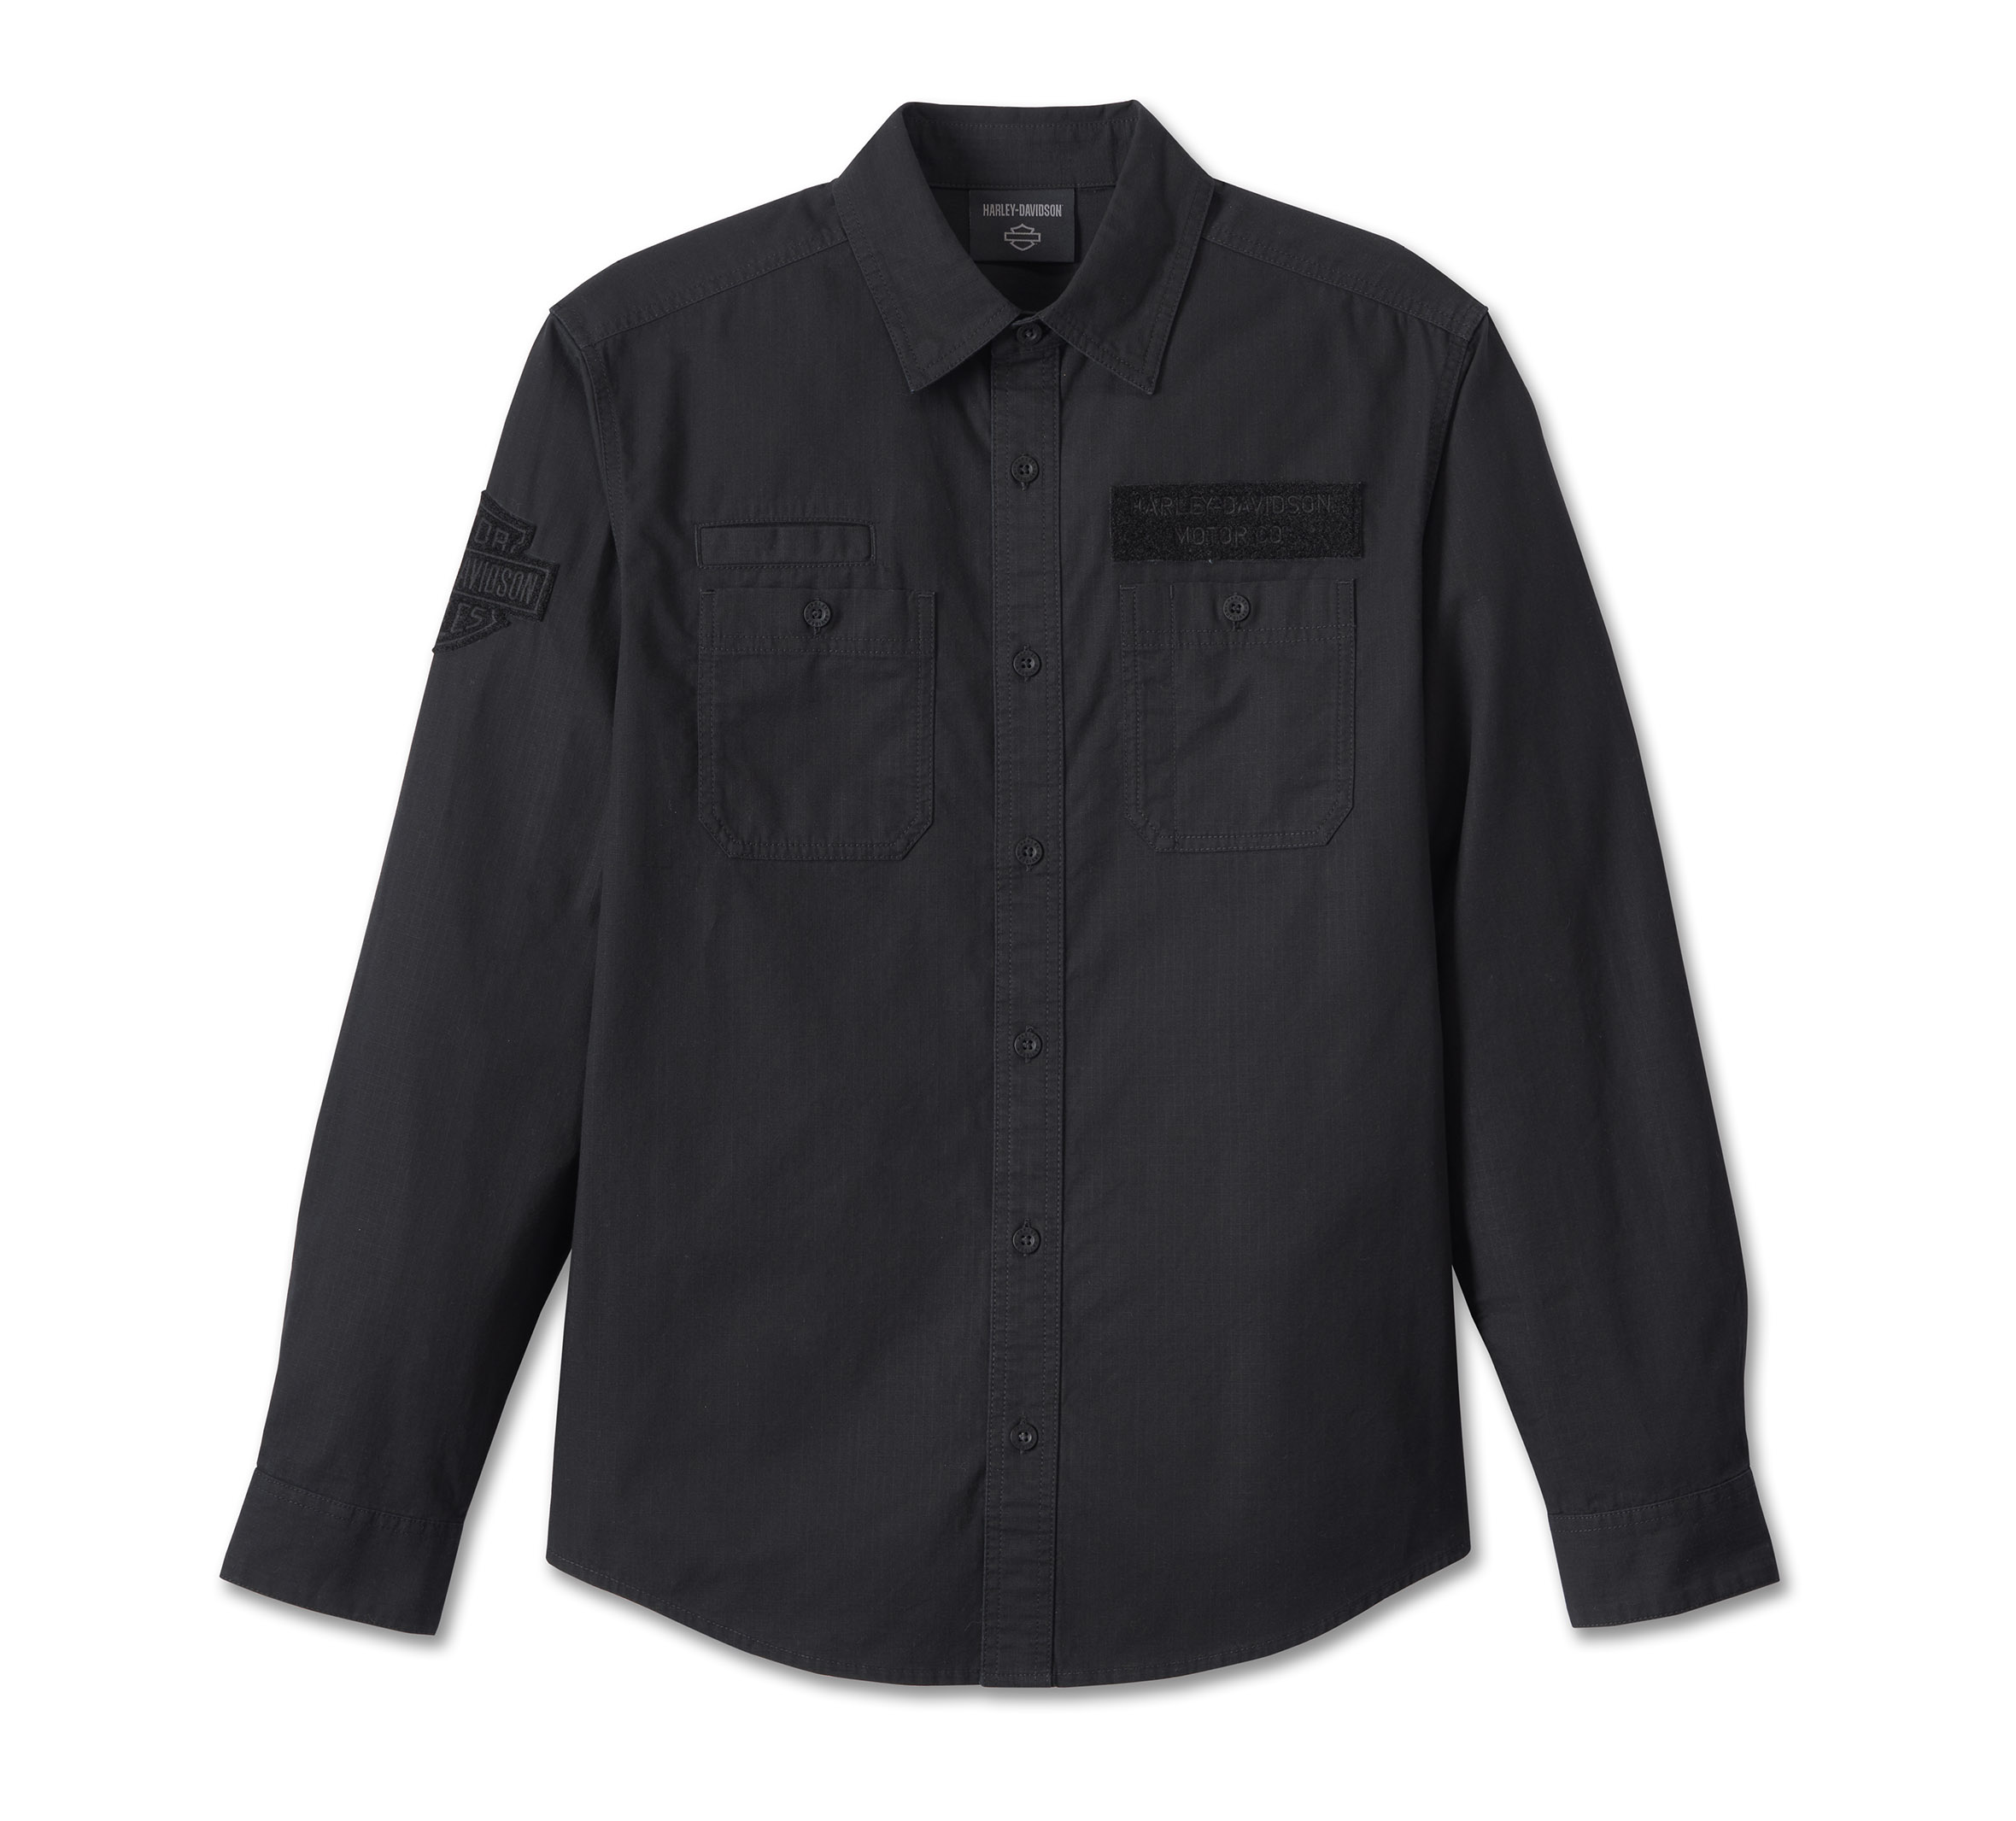 XXXL Shirts for Men Black of Friday Sales Today Clearance Prime